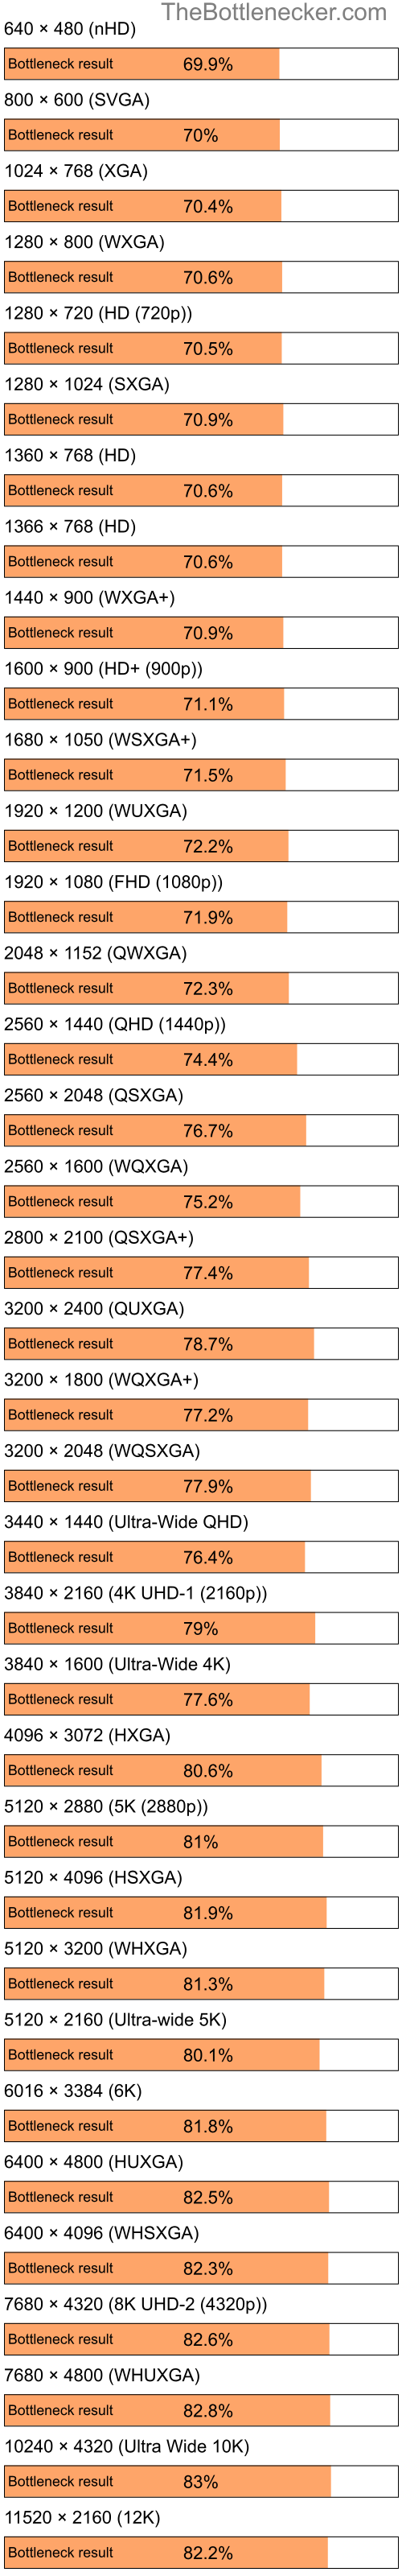 Bottleneck results by resolution for Intel Celeron and AMD Mobility Radeon HD 2300 in General Tasks